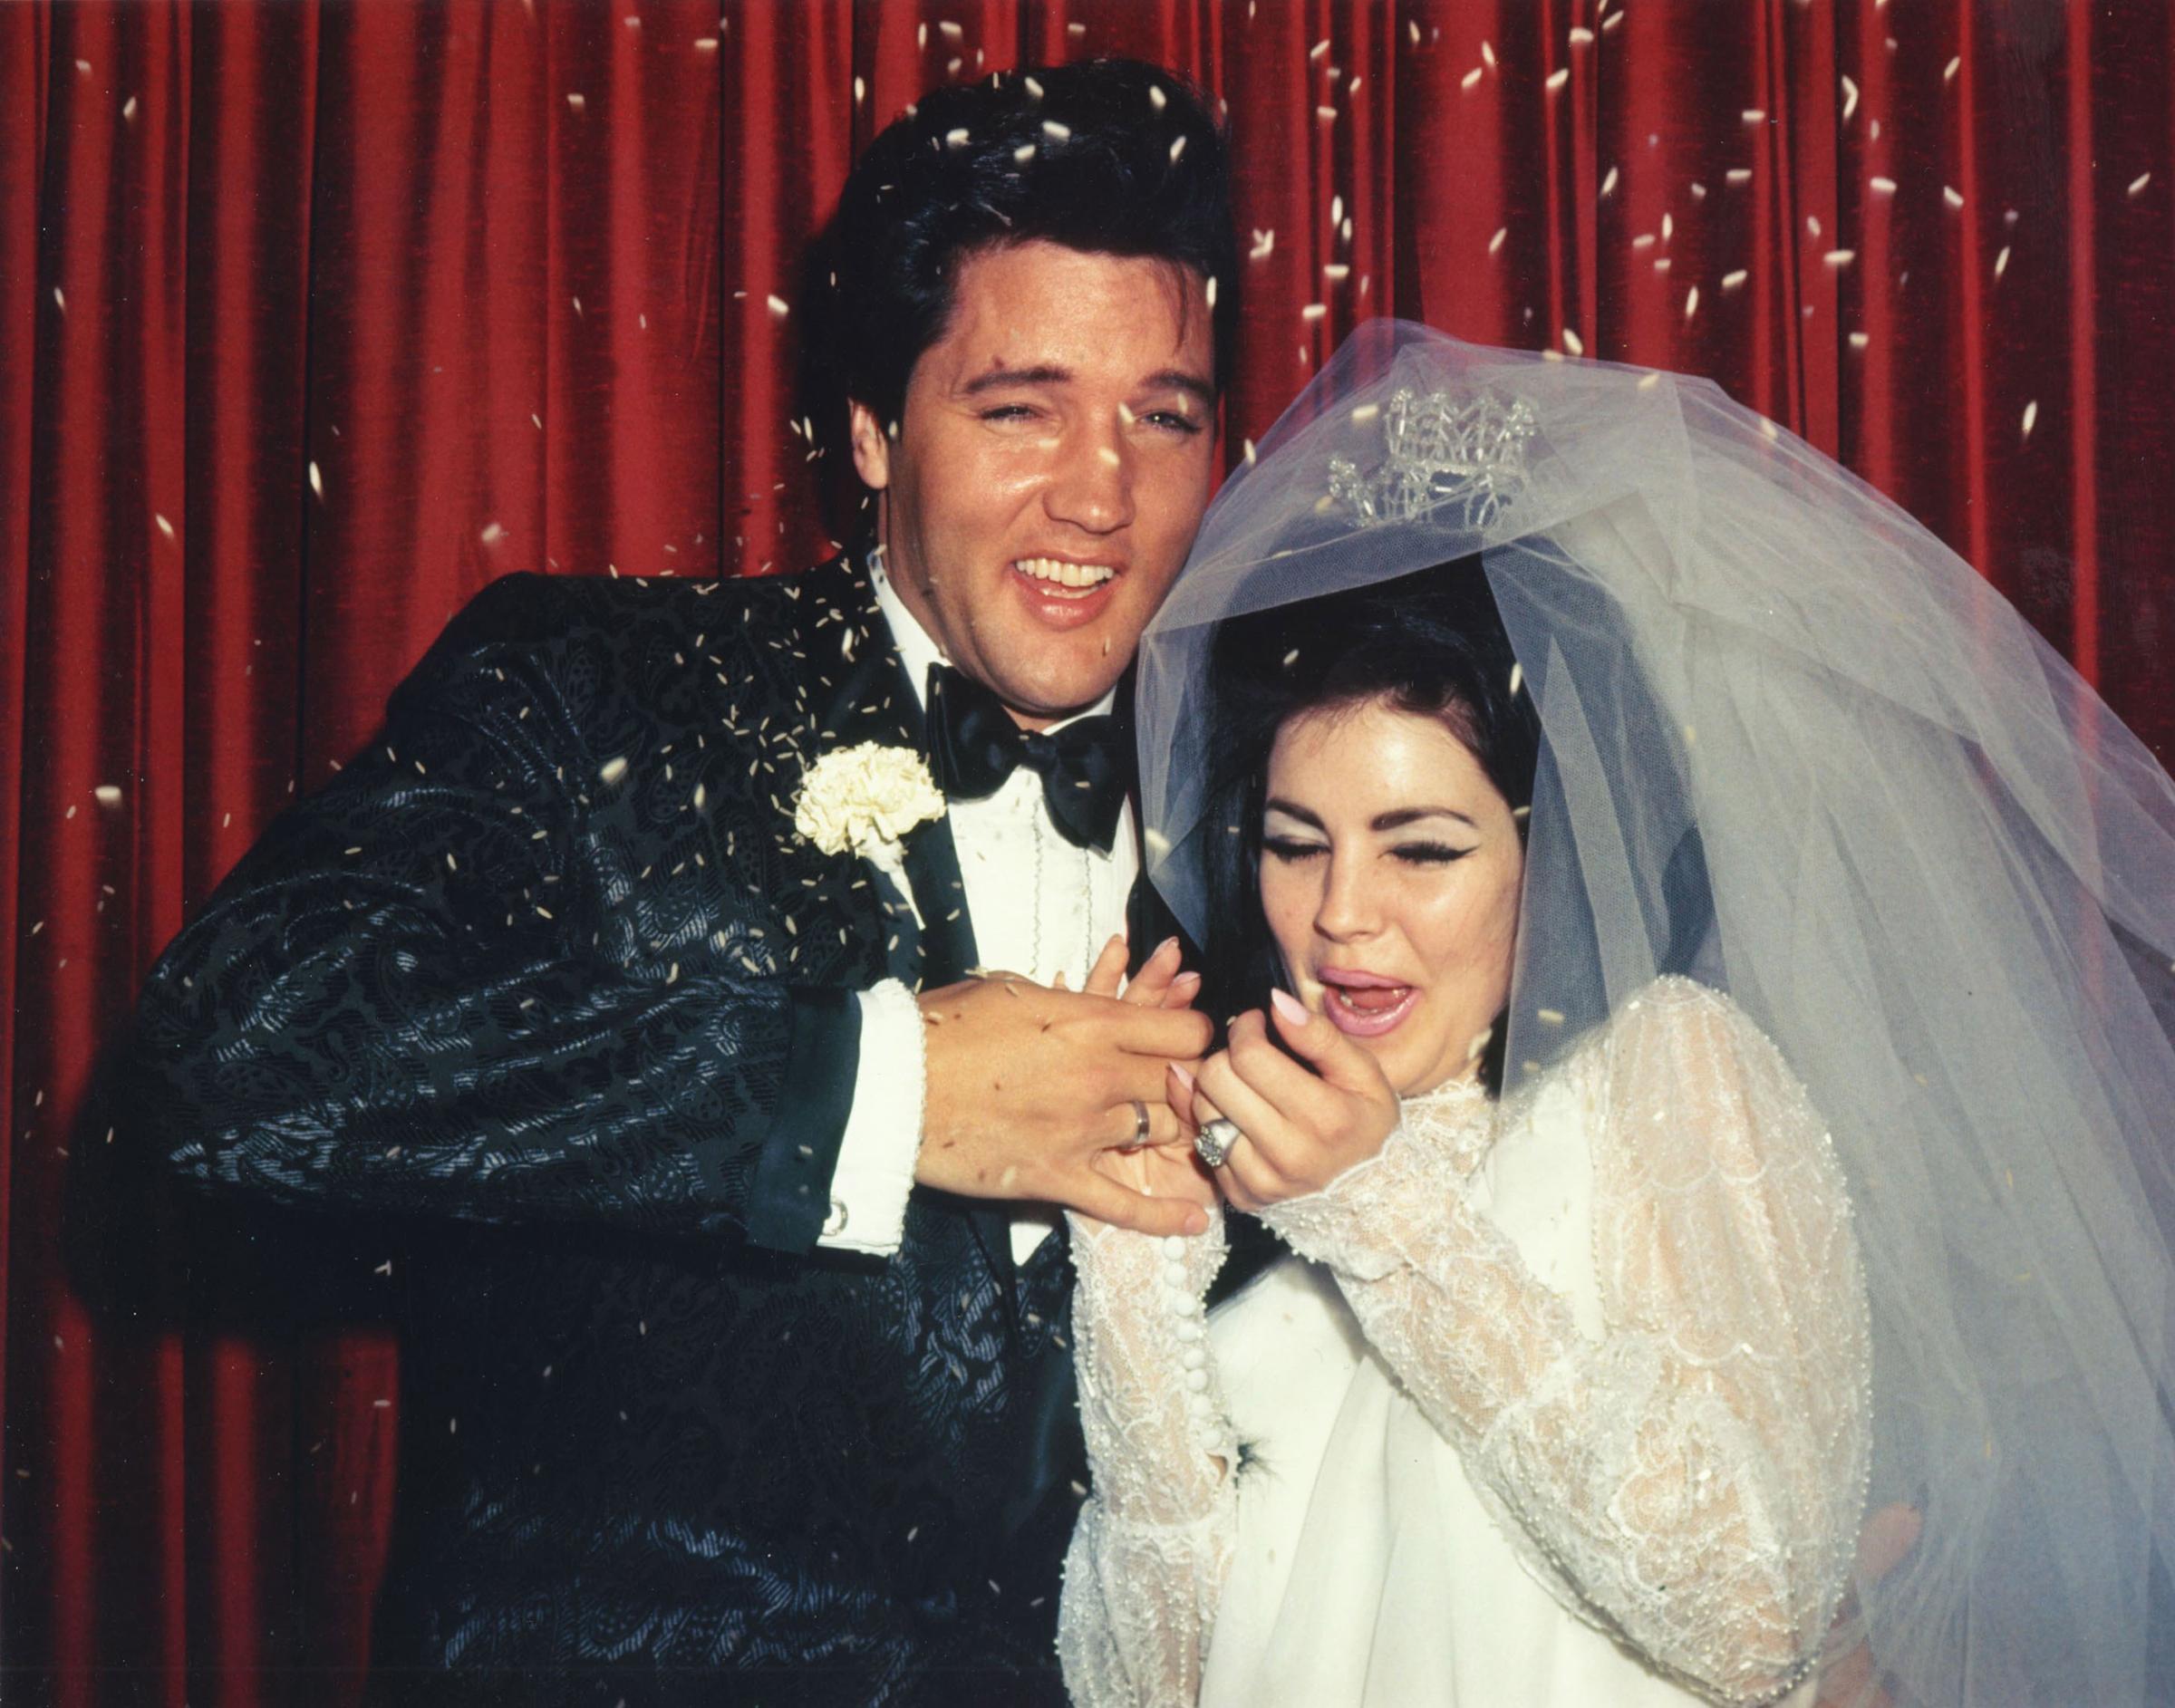 Elvis Presley and Priscilla on their wedding day, May 01,1967.